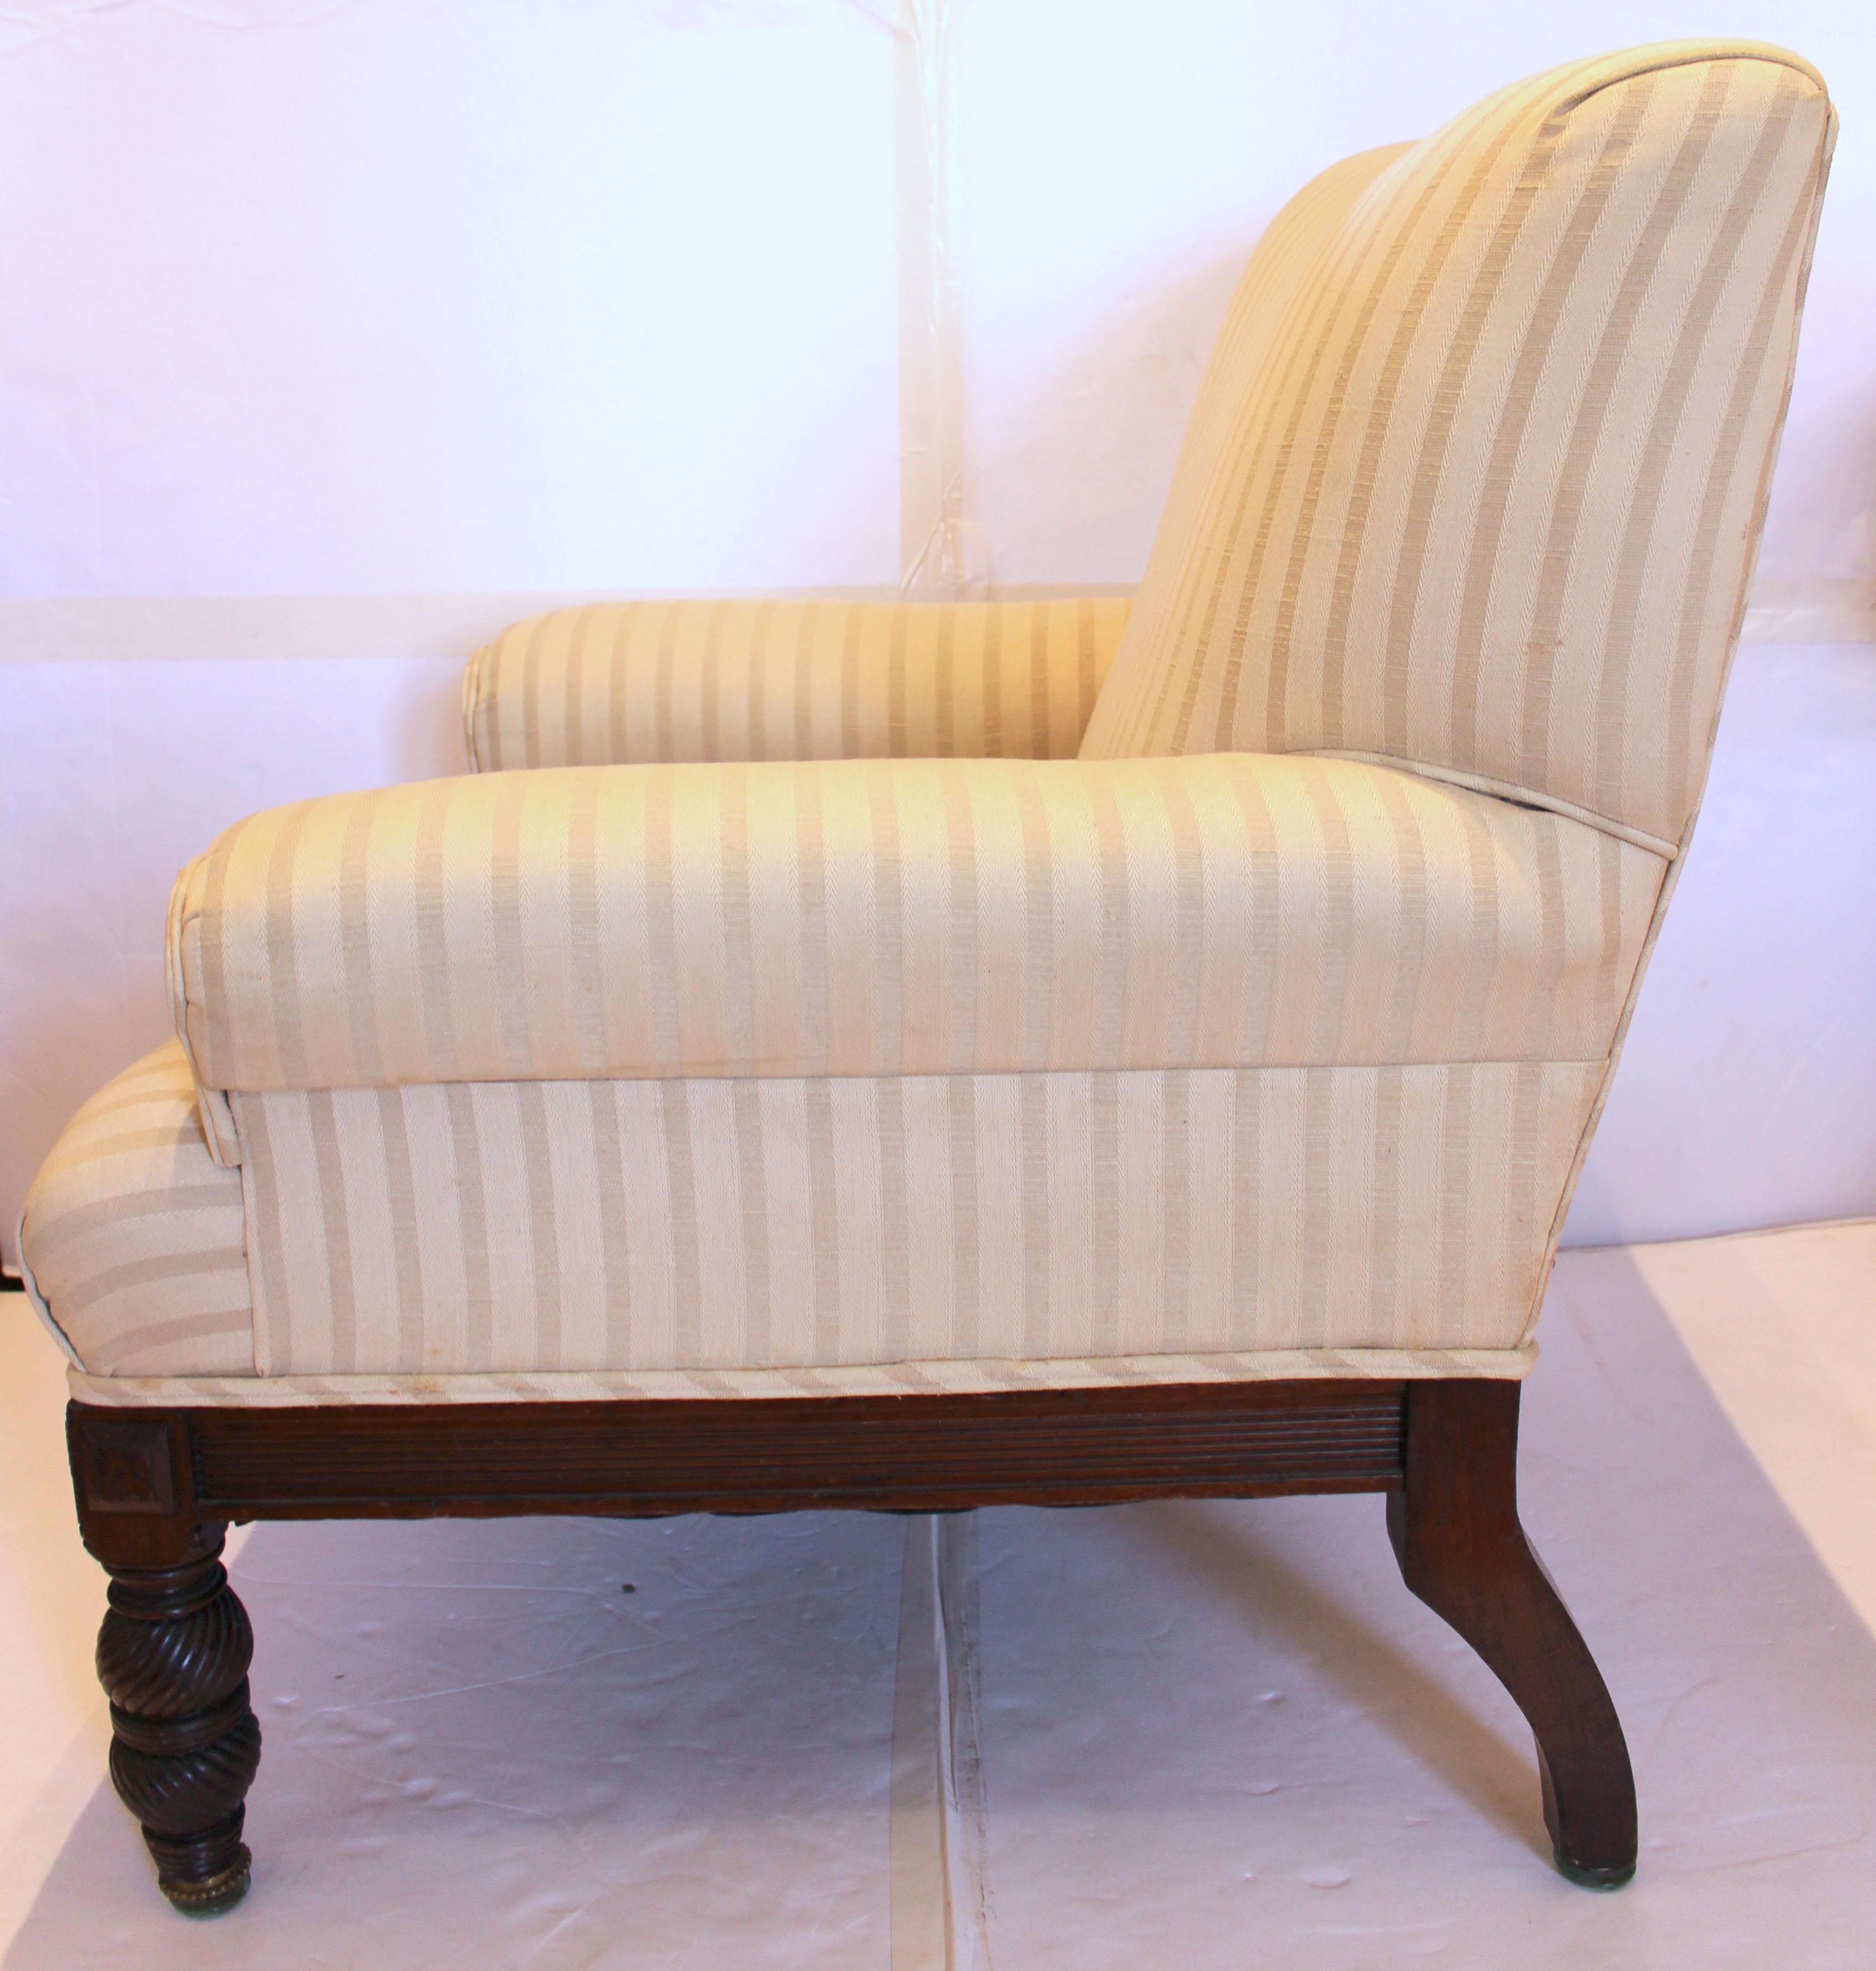 British Circa 1820-30 George IV/Late Regency Period Library Easy Chair, English